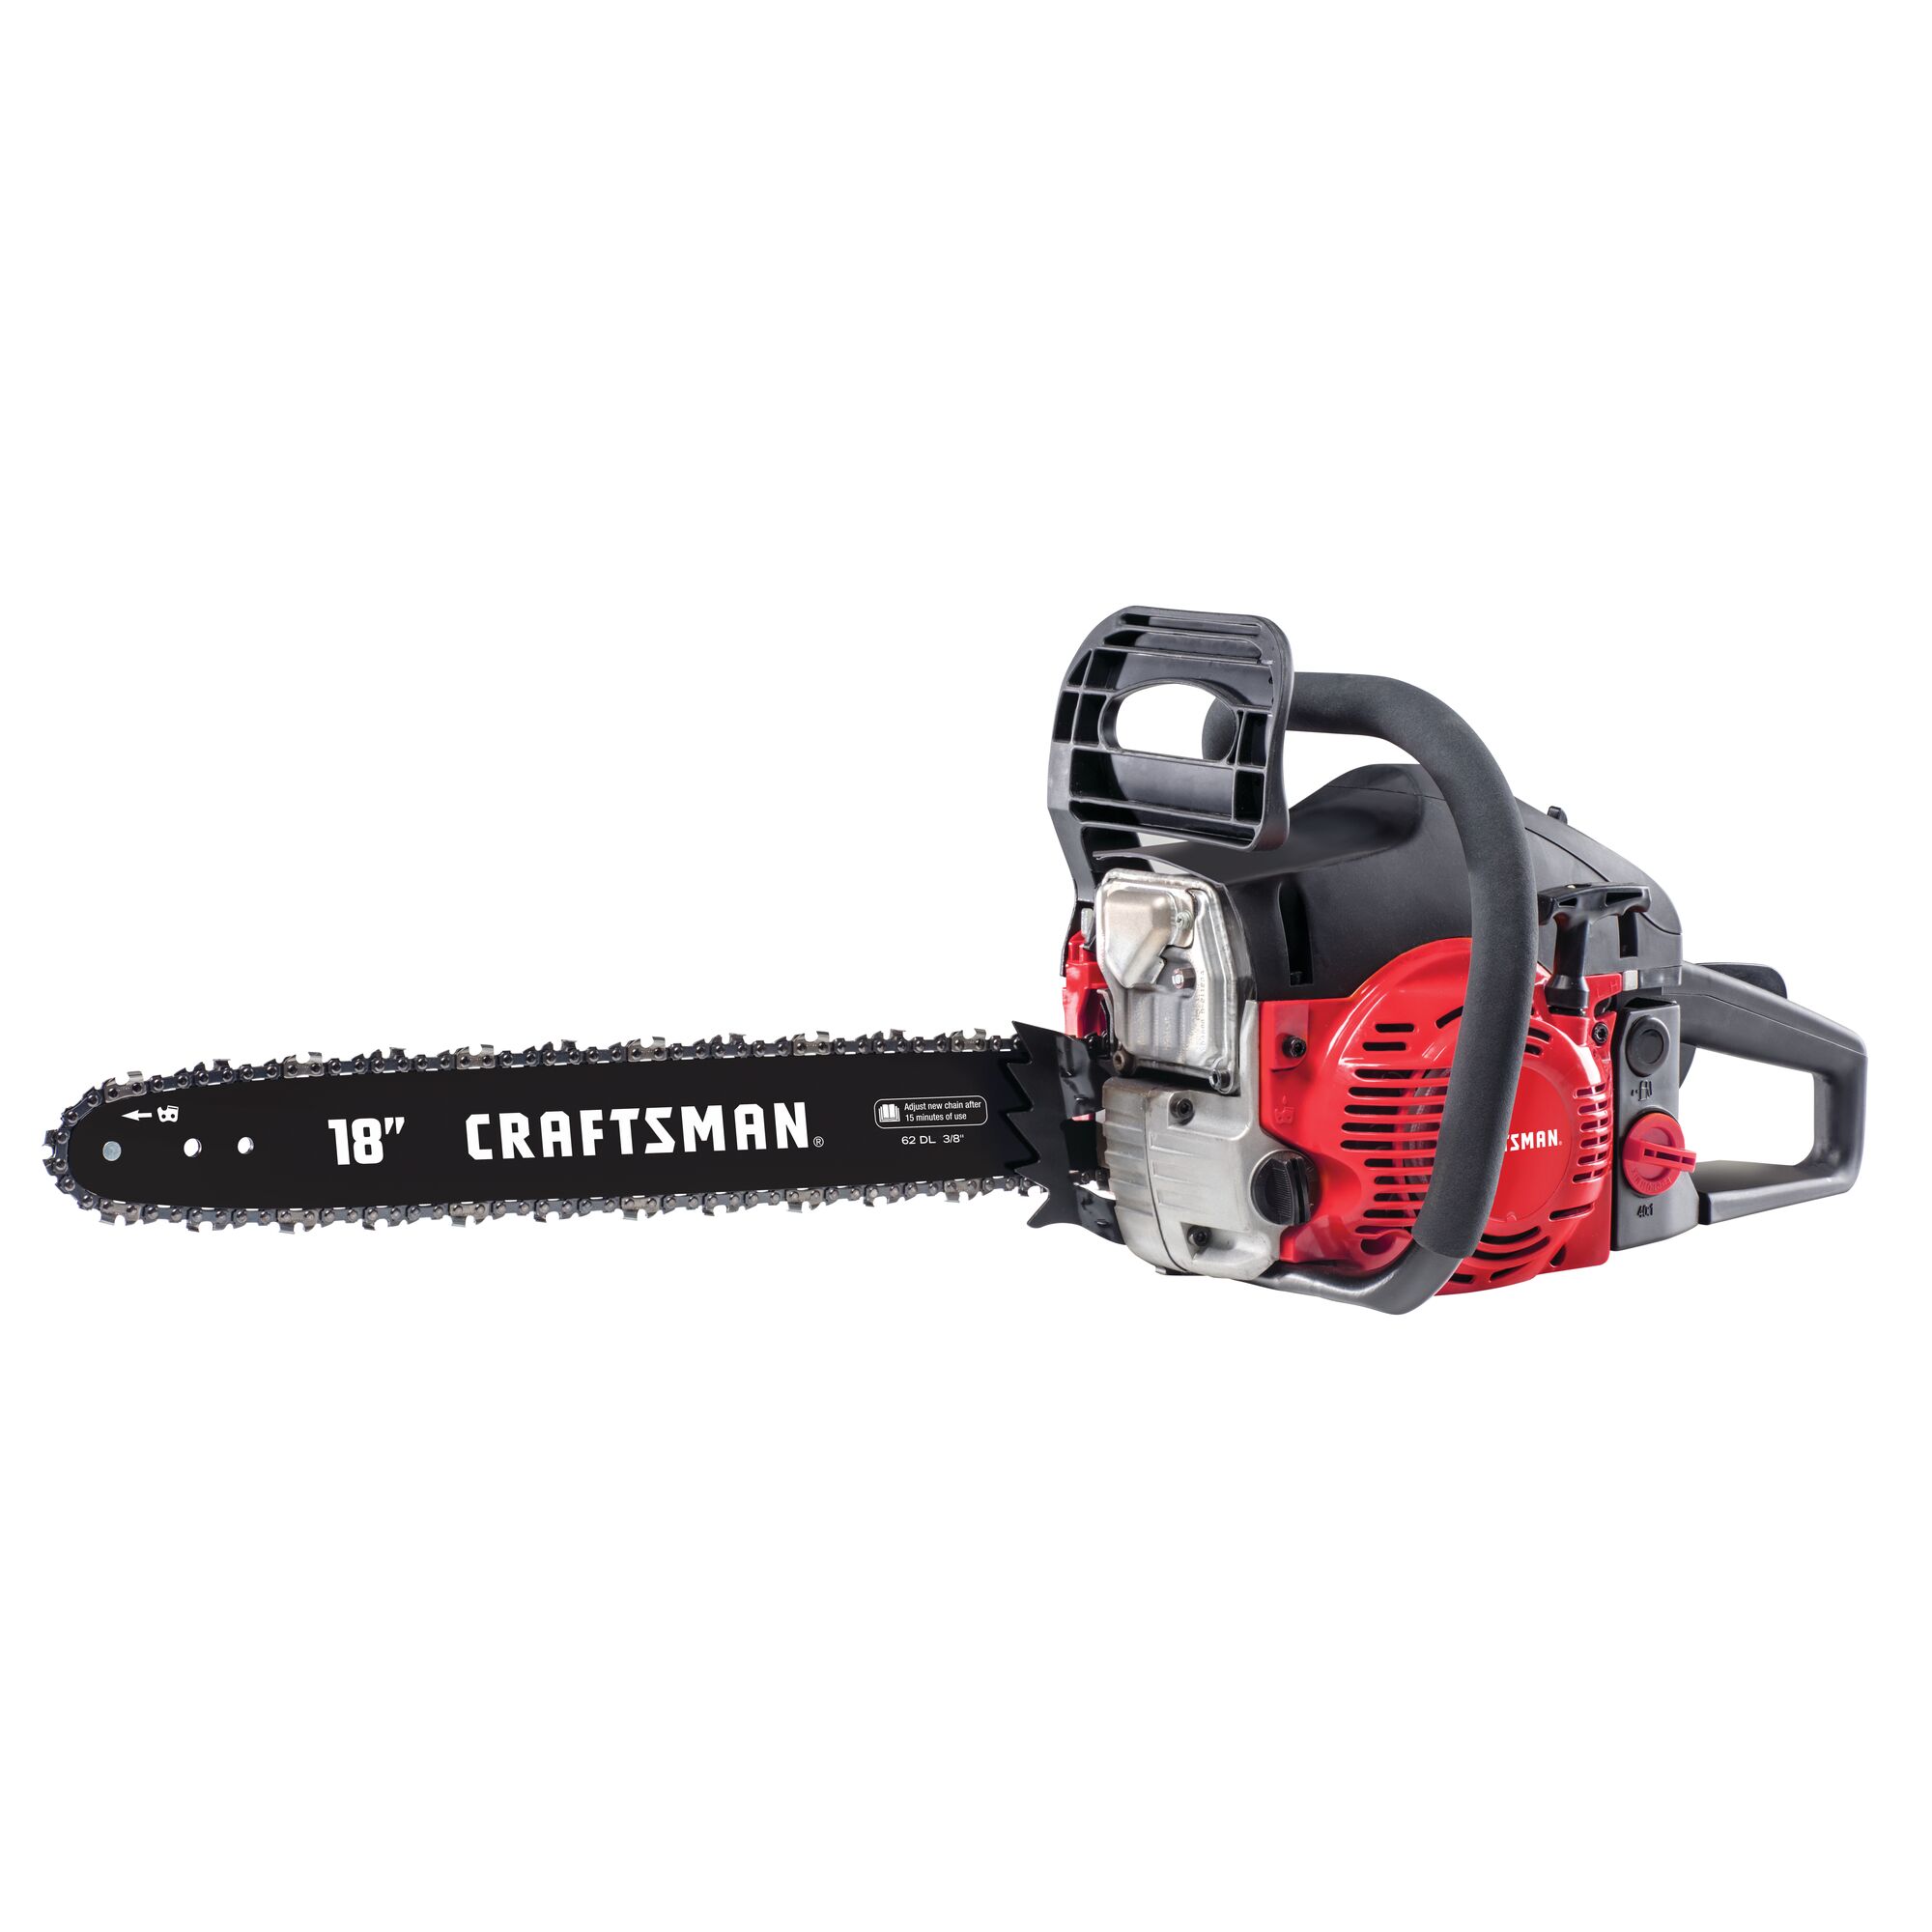 Profile of 18 inch 2 Cycle chainsaw.